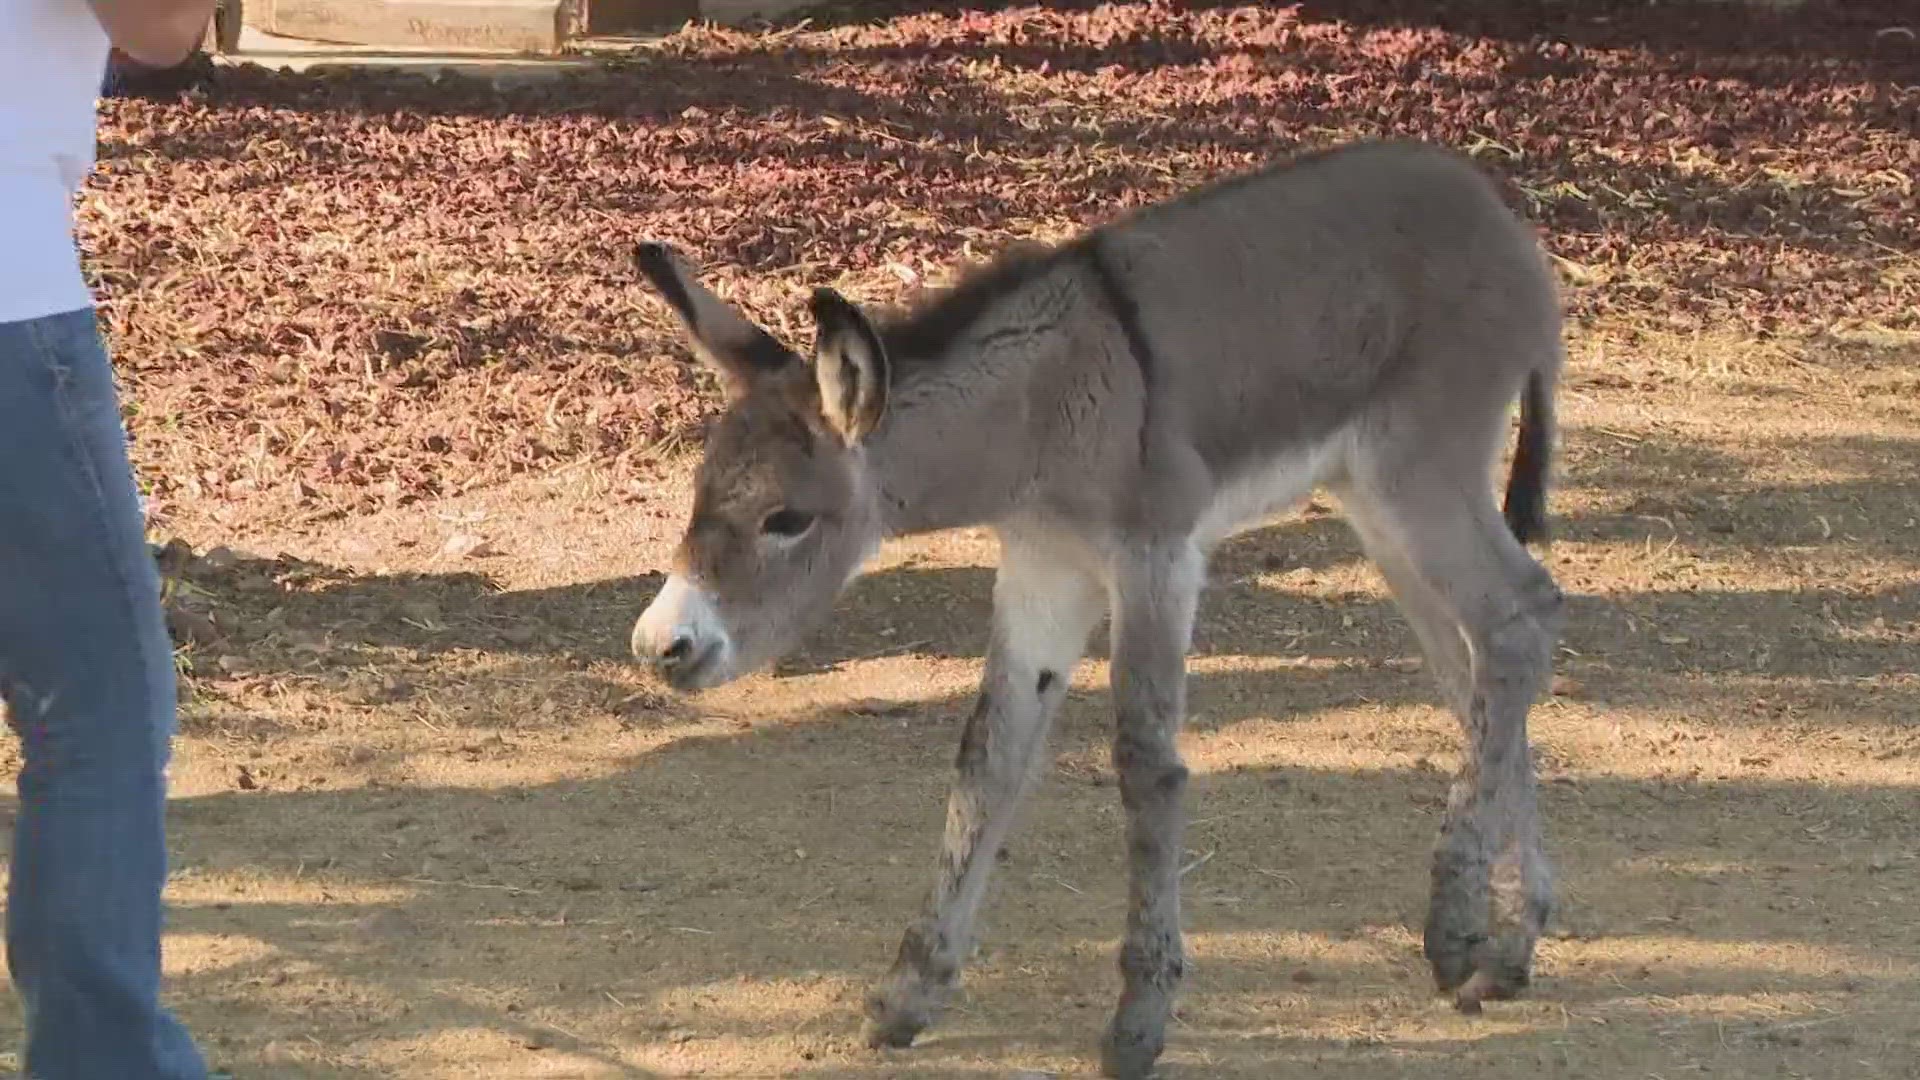 The day-old foal was brought to One Step Wild Burros and Mustang Rescue.